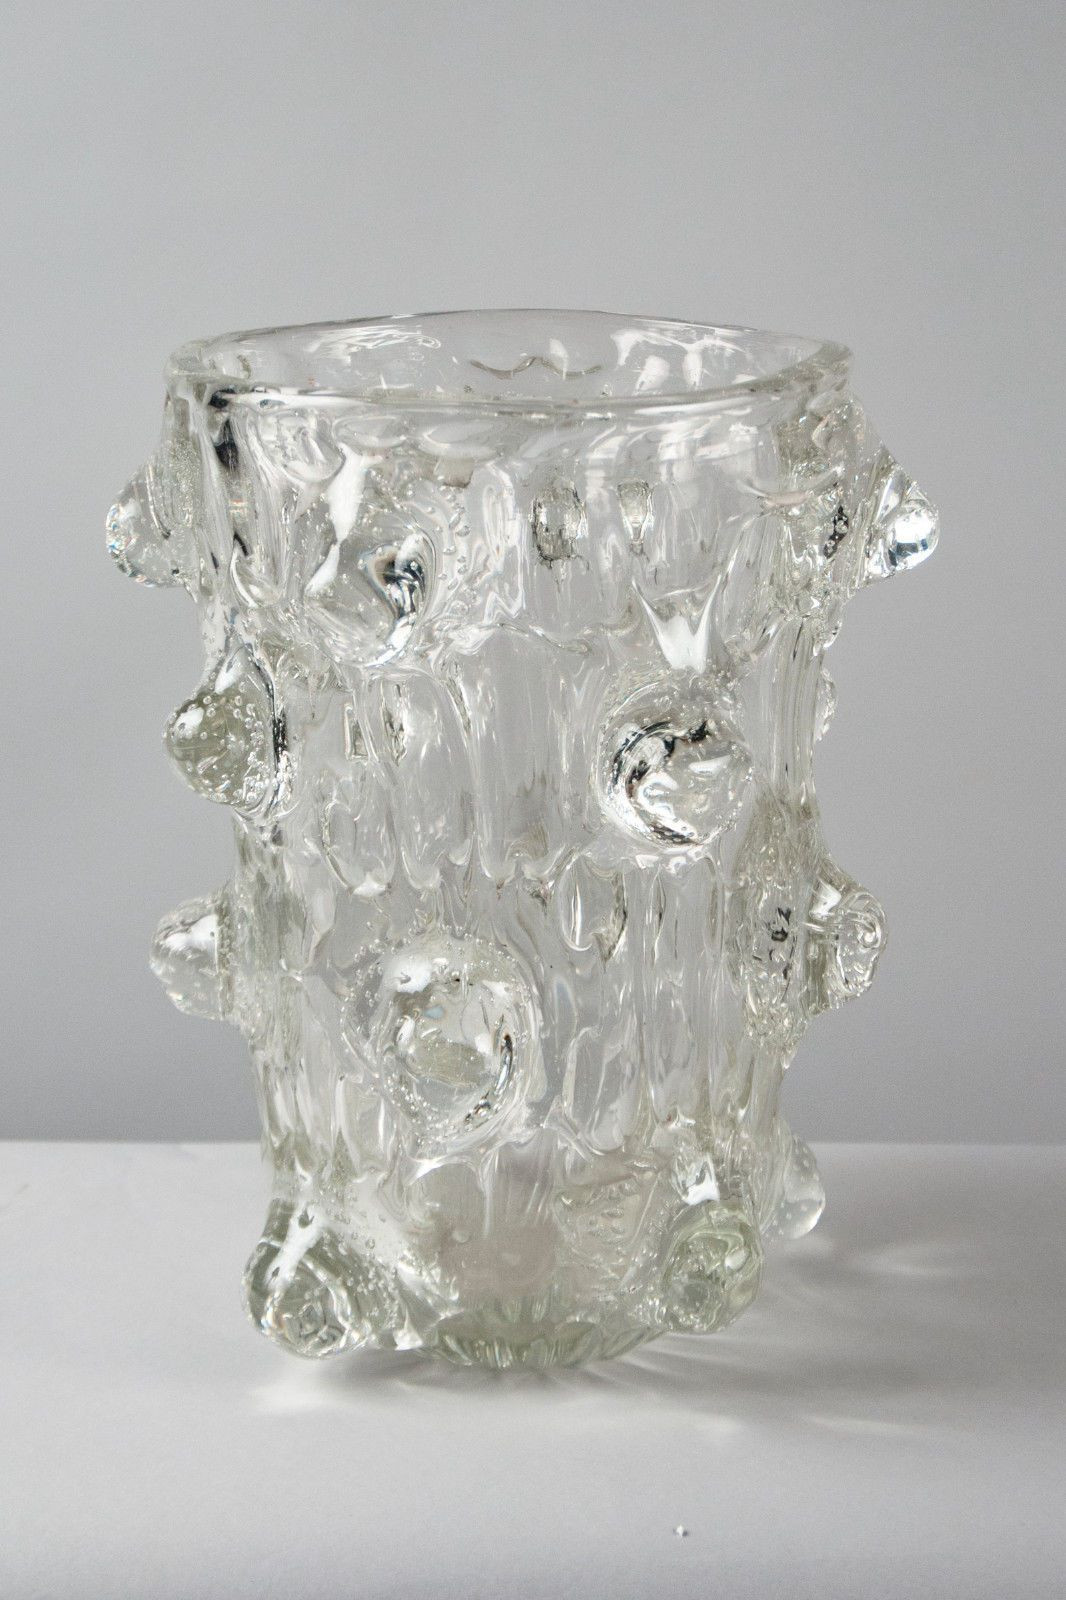 16 Fashionable Glass Vase with Bubbles 2022 free download glass vase with bubbles of n10207 vase by ercole barovier 1889 1974 italy 1938 ebay ting in n10207 vase by ercole barovier 1889 1974 italy 1938 ebay